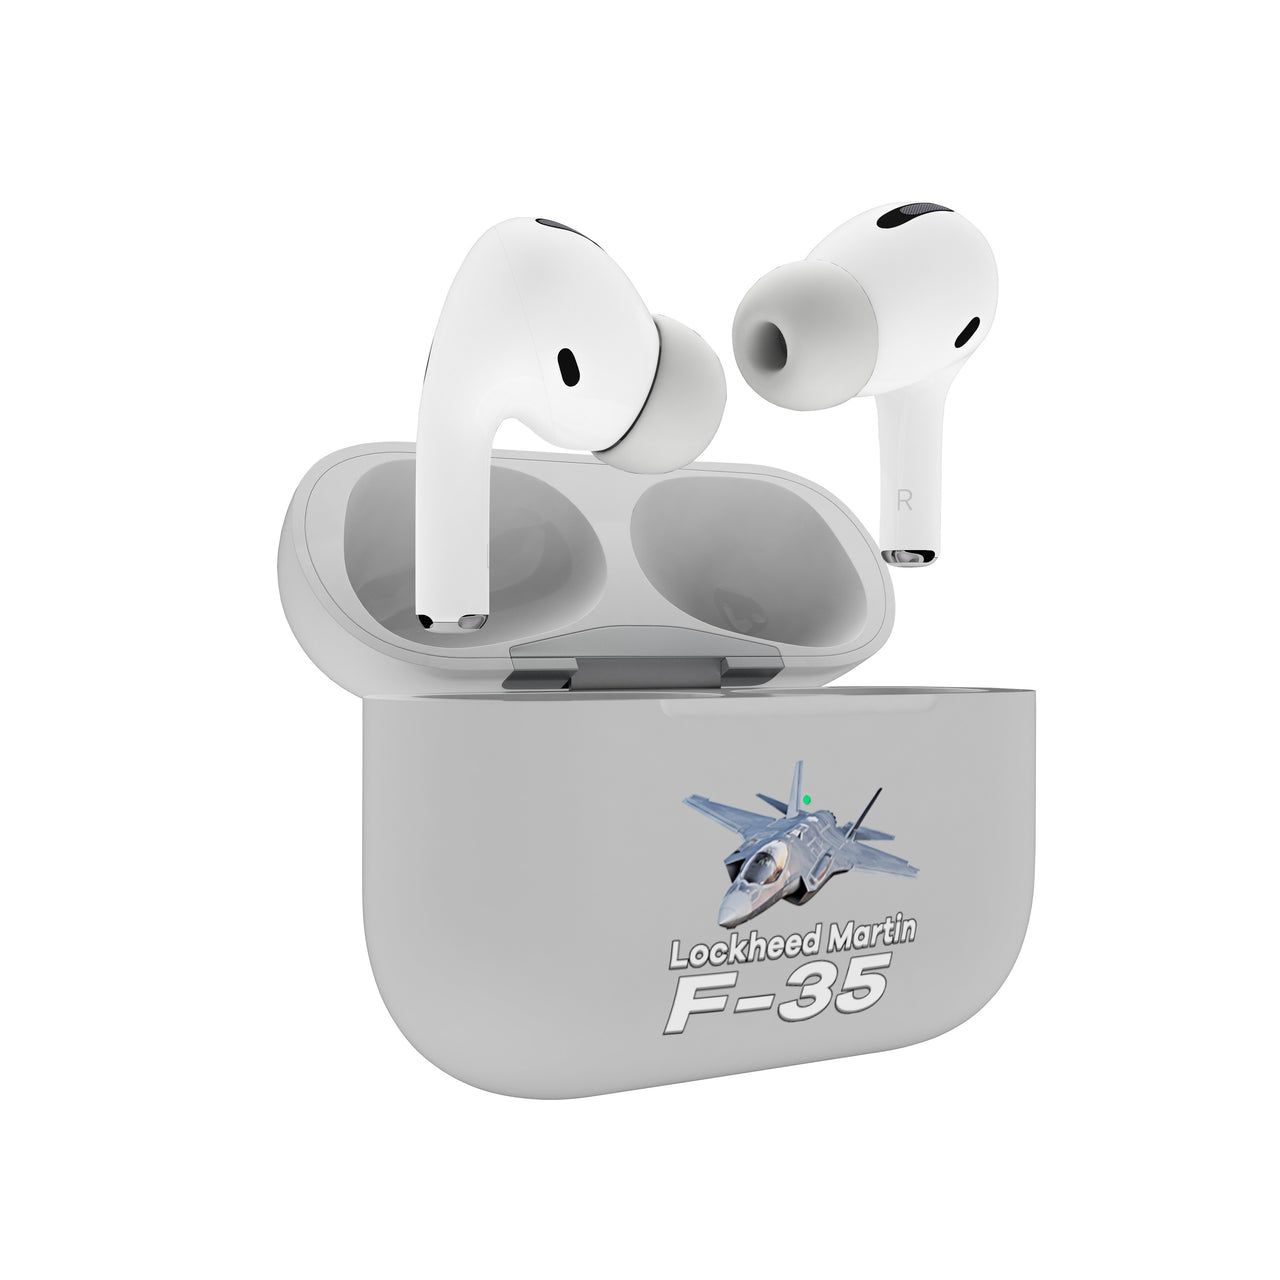 The Lockheed Martin F35 Designed AirPods  Cases